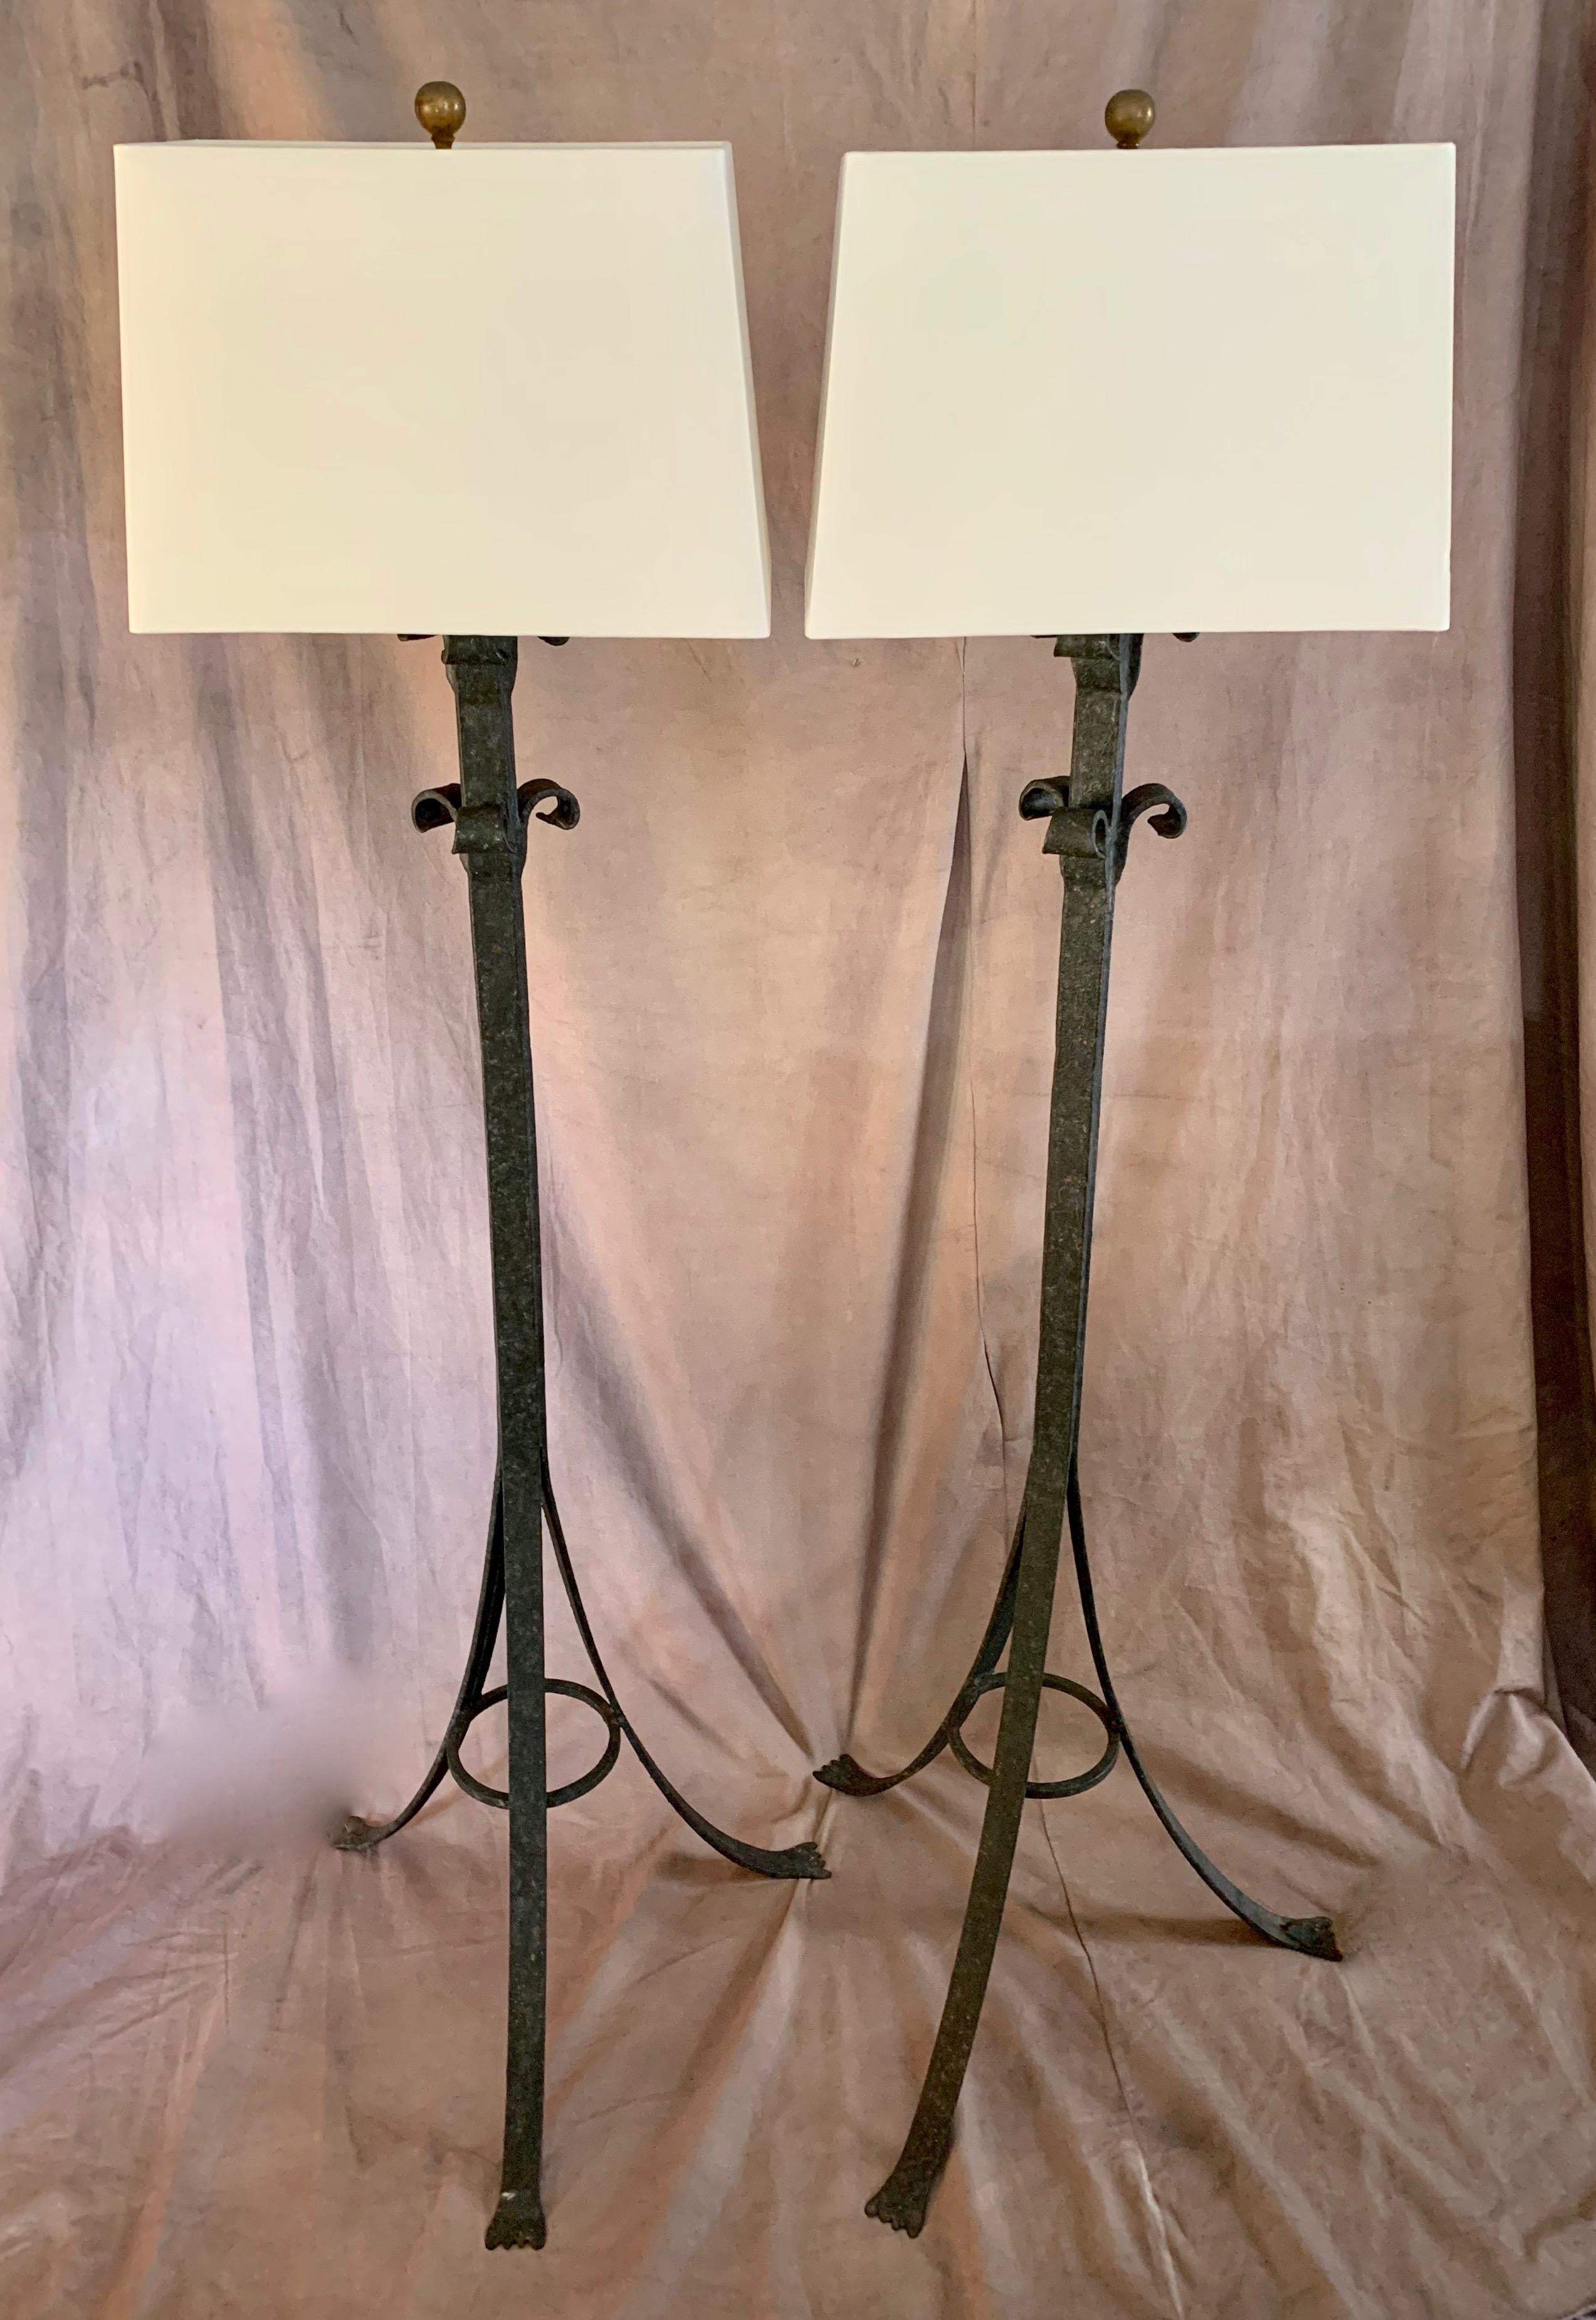 A handsome pair of wrought iron floor lamps - suitable for the living room, den, office or bedroom. A compliment to modern and traditional spaces, especially spaces that lend their tone to Spanish, Moroccan or tribal spaces. Single bulb housing with